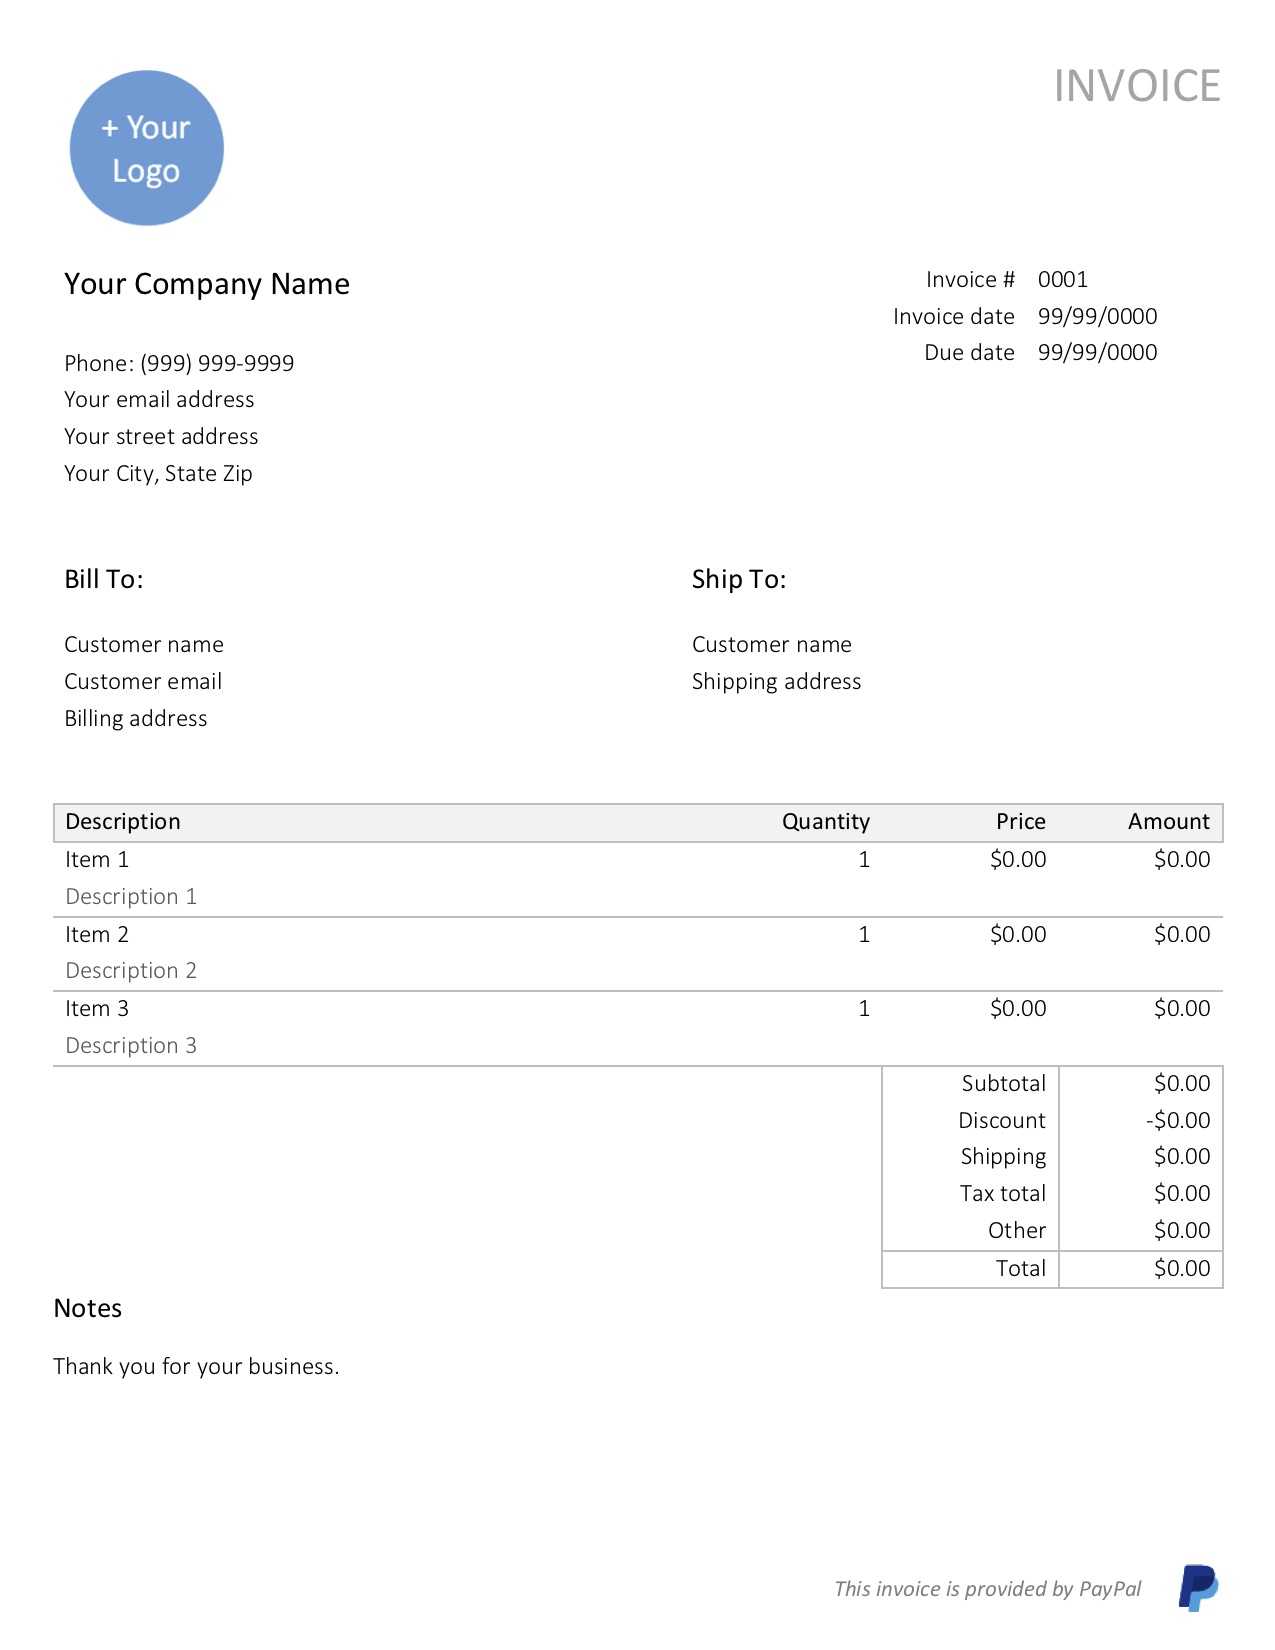 Free, Downloadable Sample Invoice Template | Paypal In Free Downloadable Invoice Template For Word